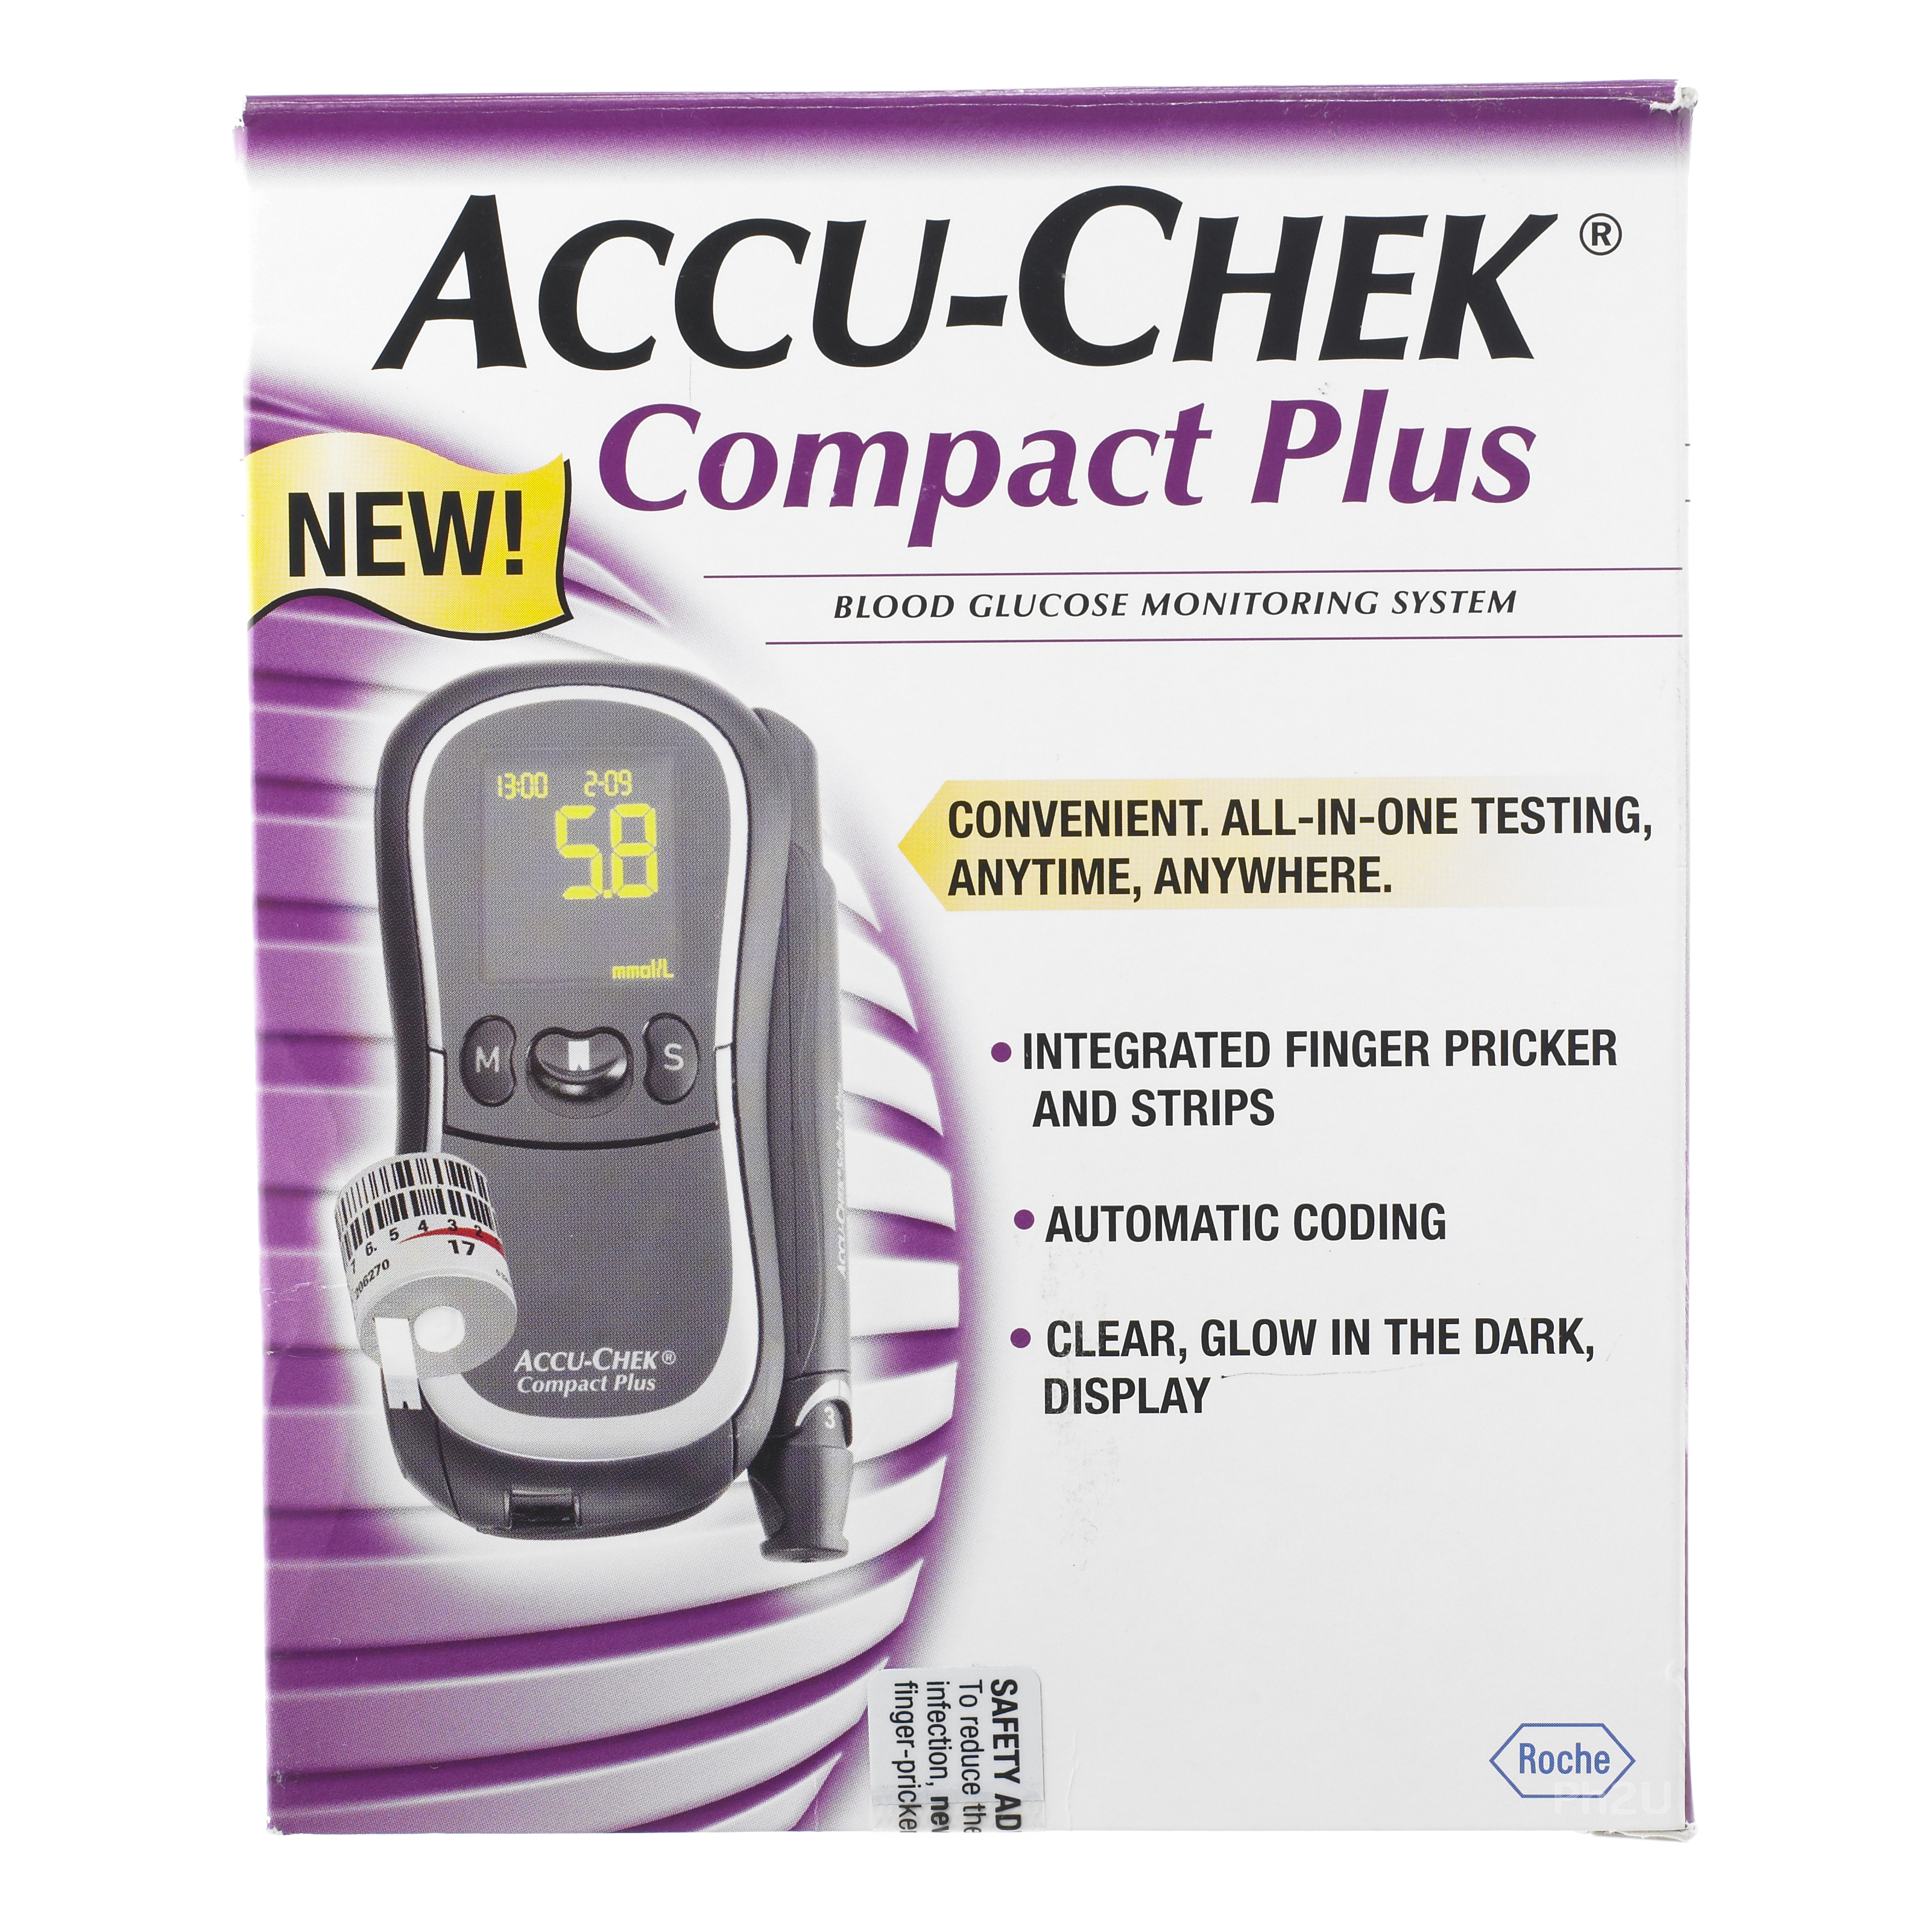 Accu-Chek Compact Plus Blood Glucose Monitoring system comes with 1 meter for blood glucose self-tes